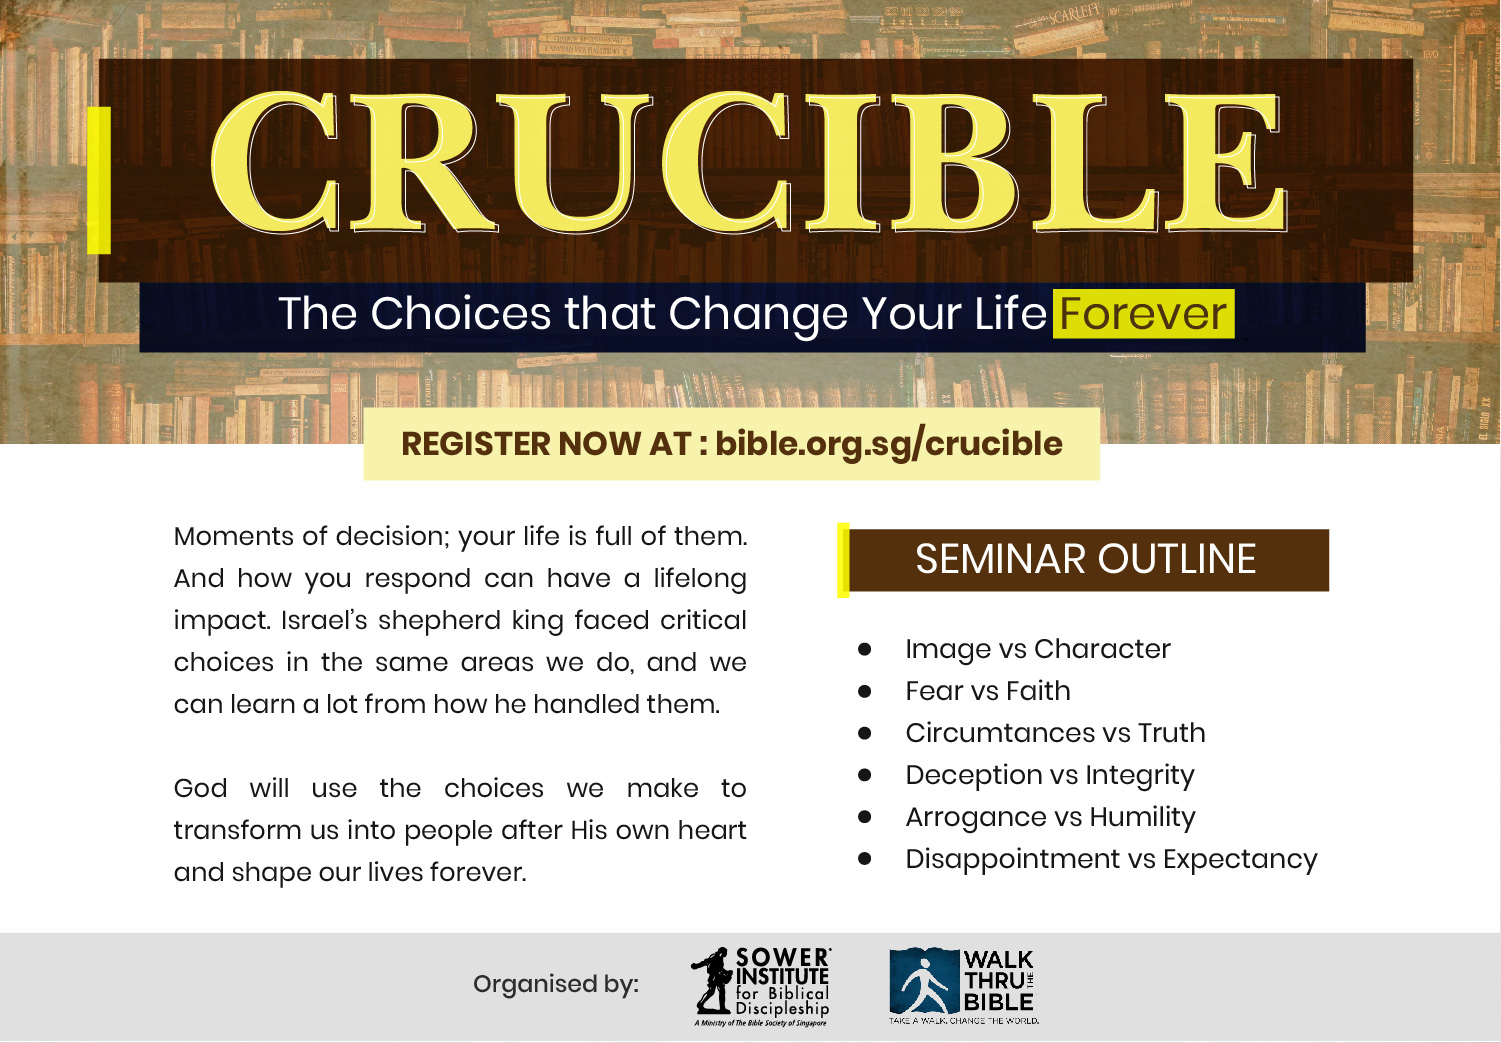 Crucible - The Choices that Change Your Life Forever